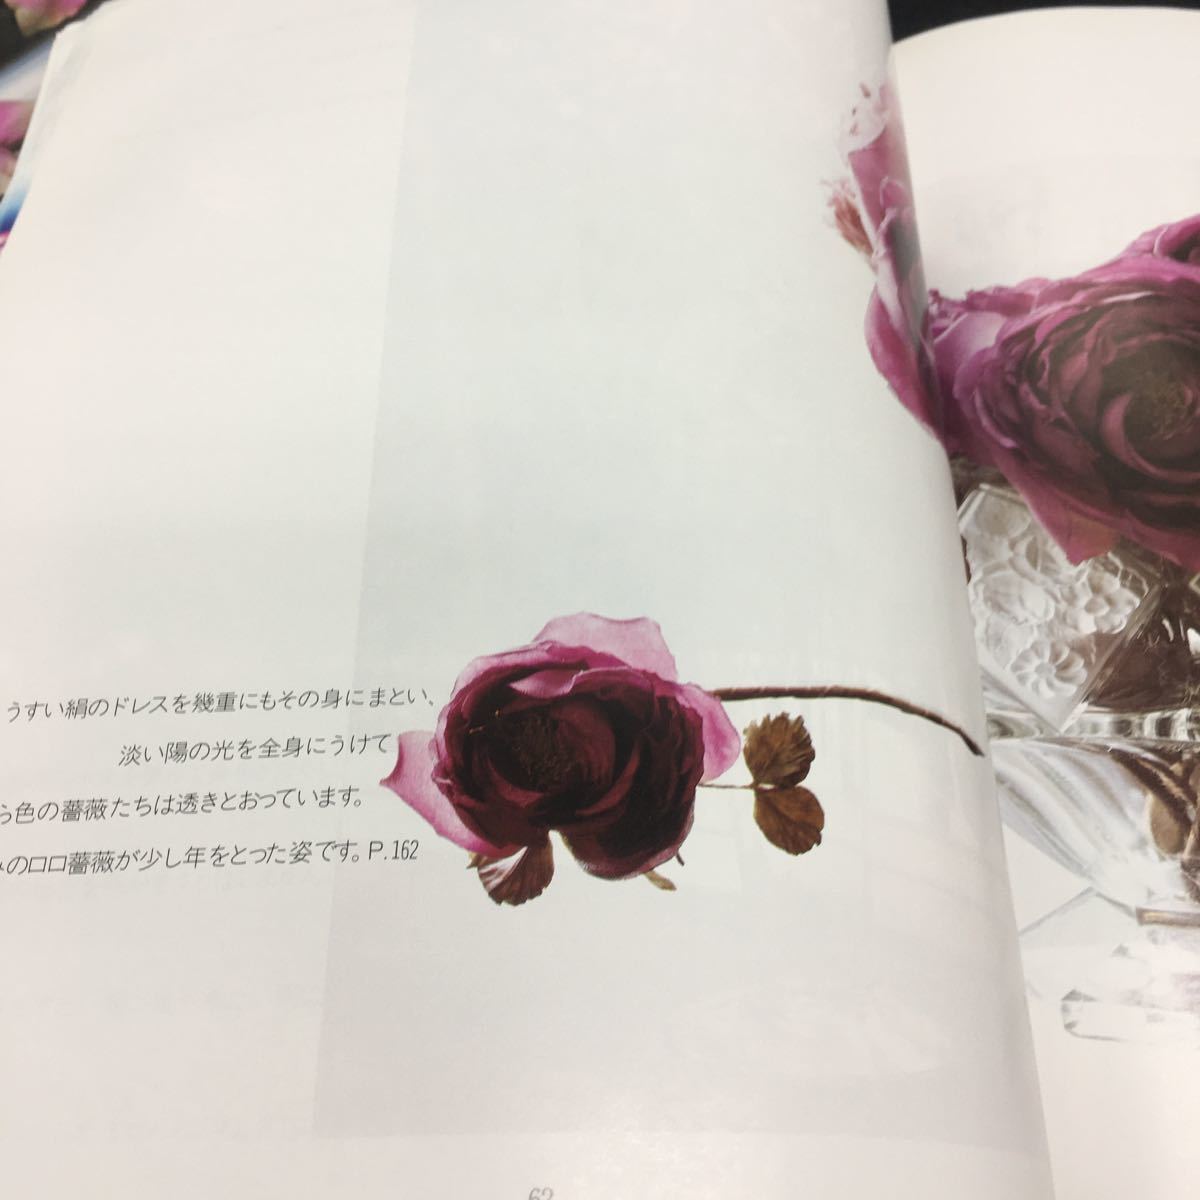 f-758 mountain on ..( cloth flower ) rose eyes next 6- black rose 92 8-... color. small rose 94 another... 1983 year 9 month 18 day issue *9